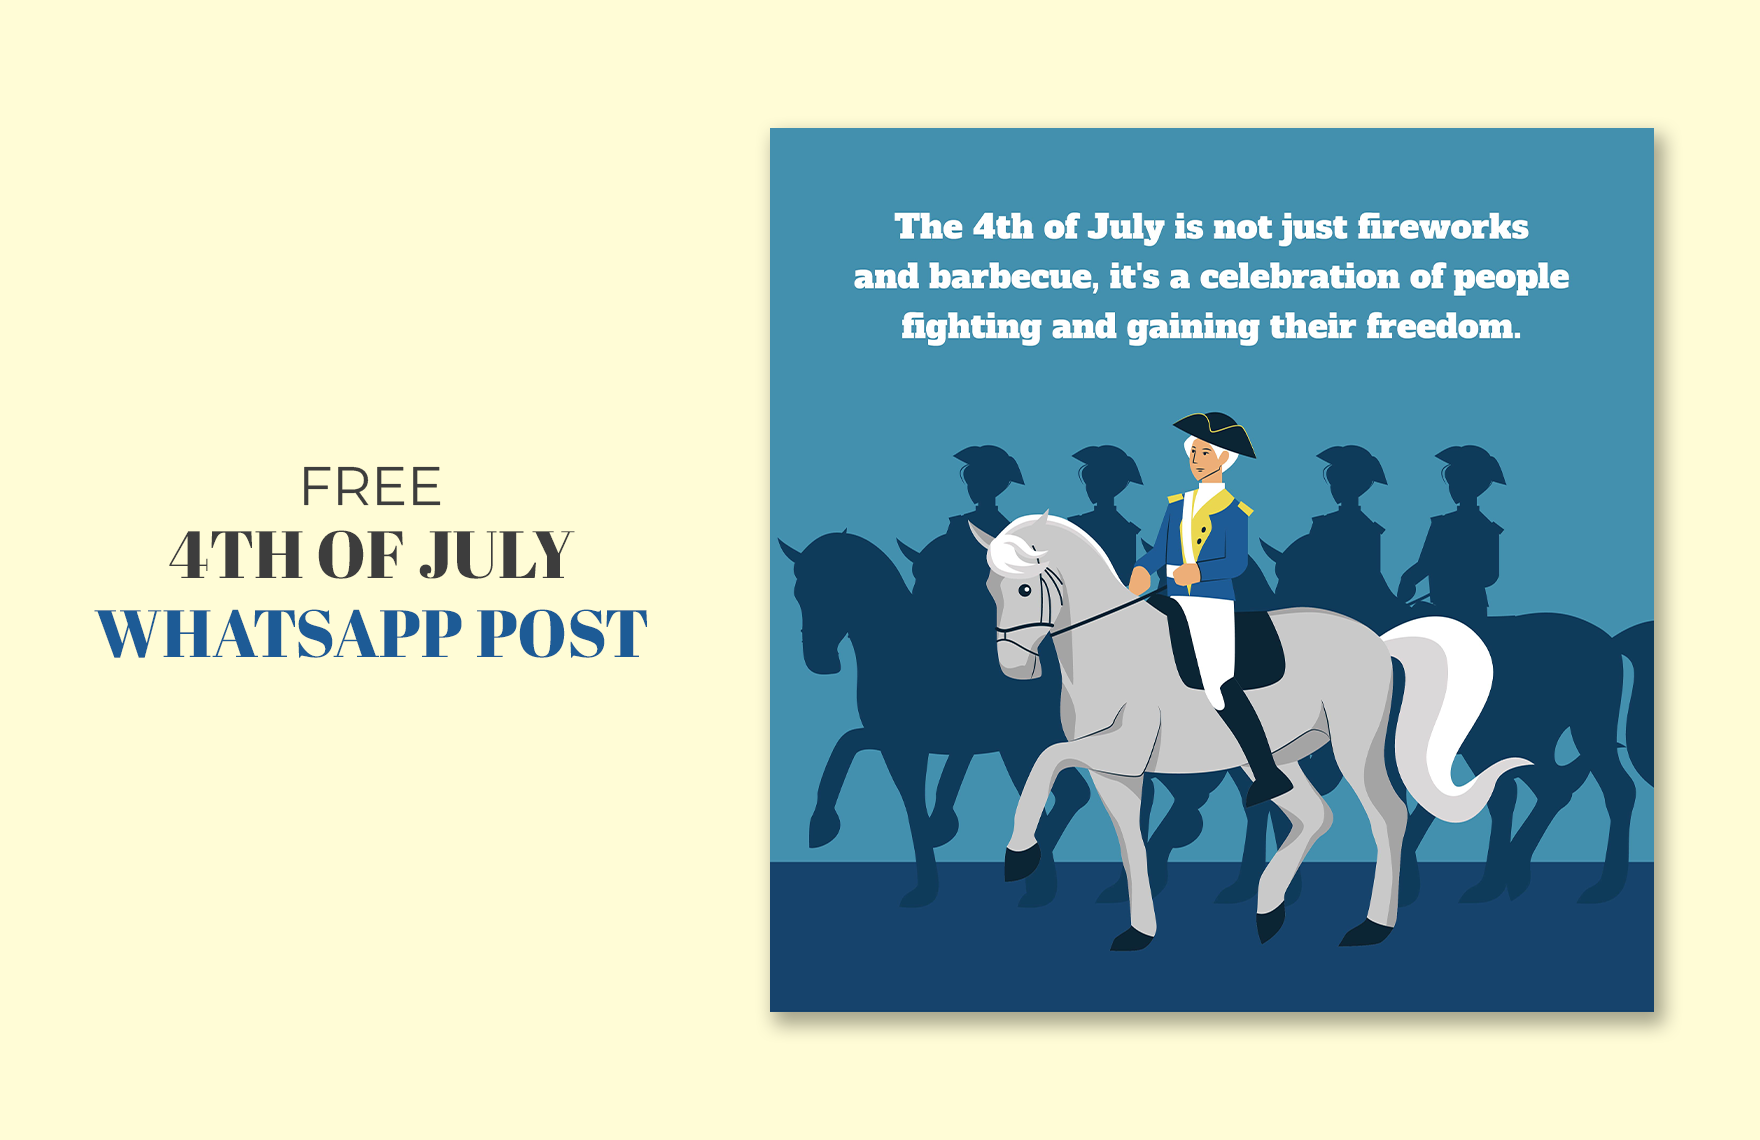 Free 4th of July Whatsapp Post in Illustrator, PSD, EPS, SVG, JPG, PNG